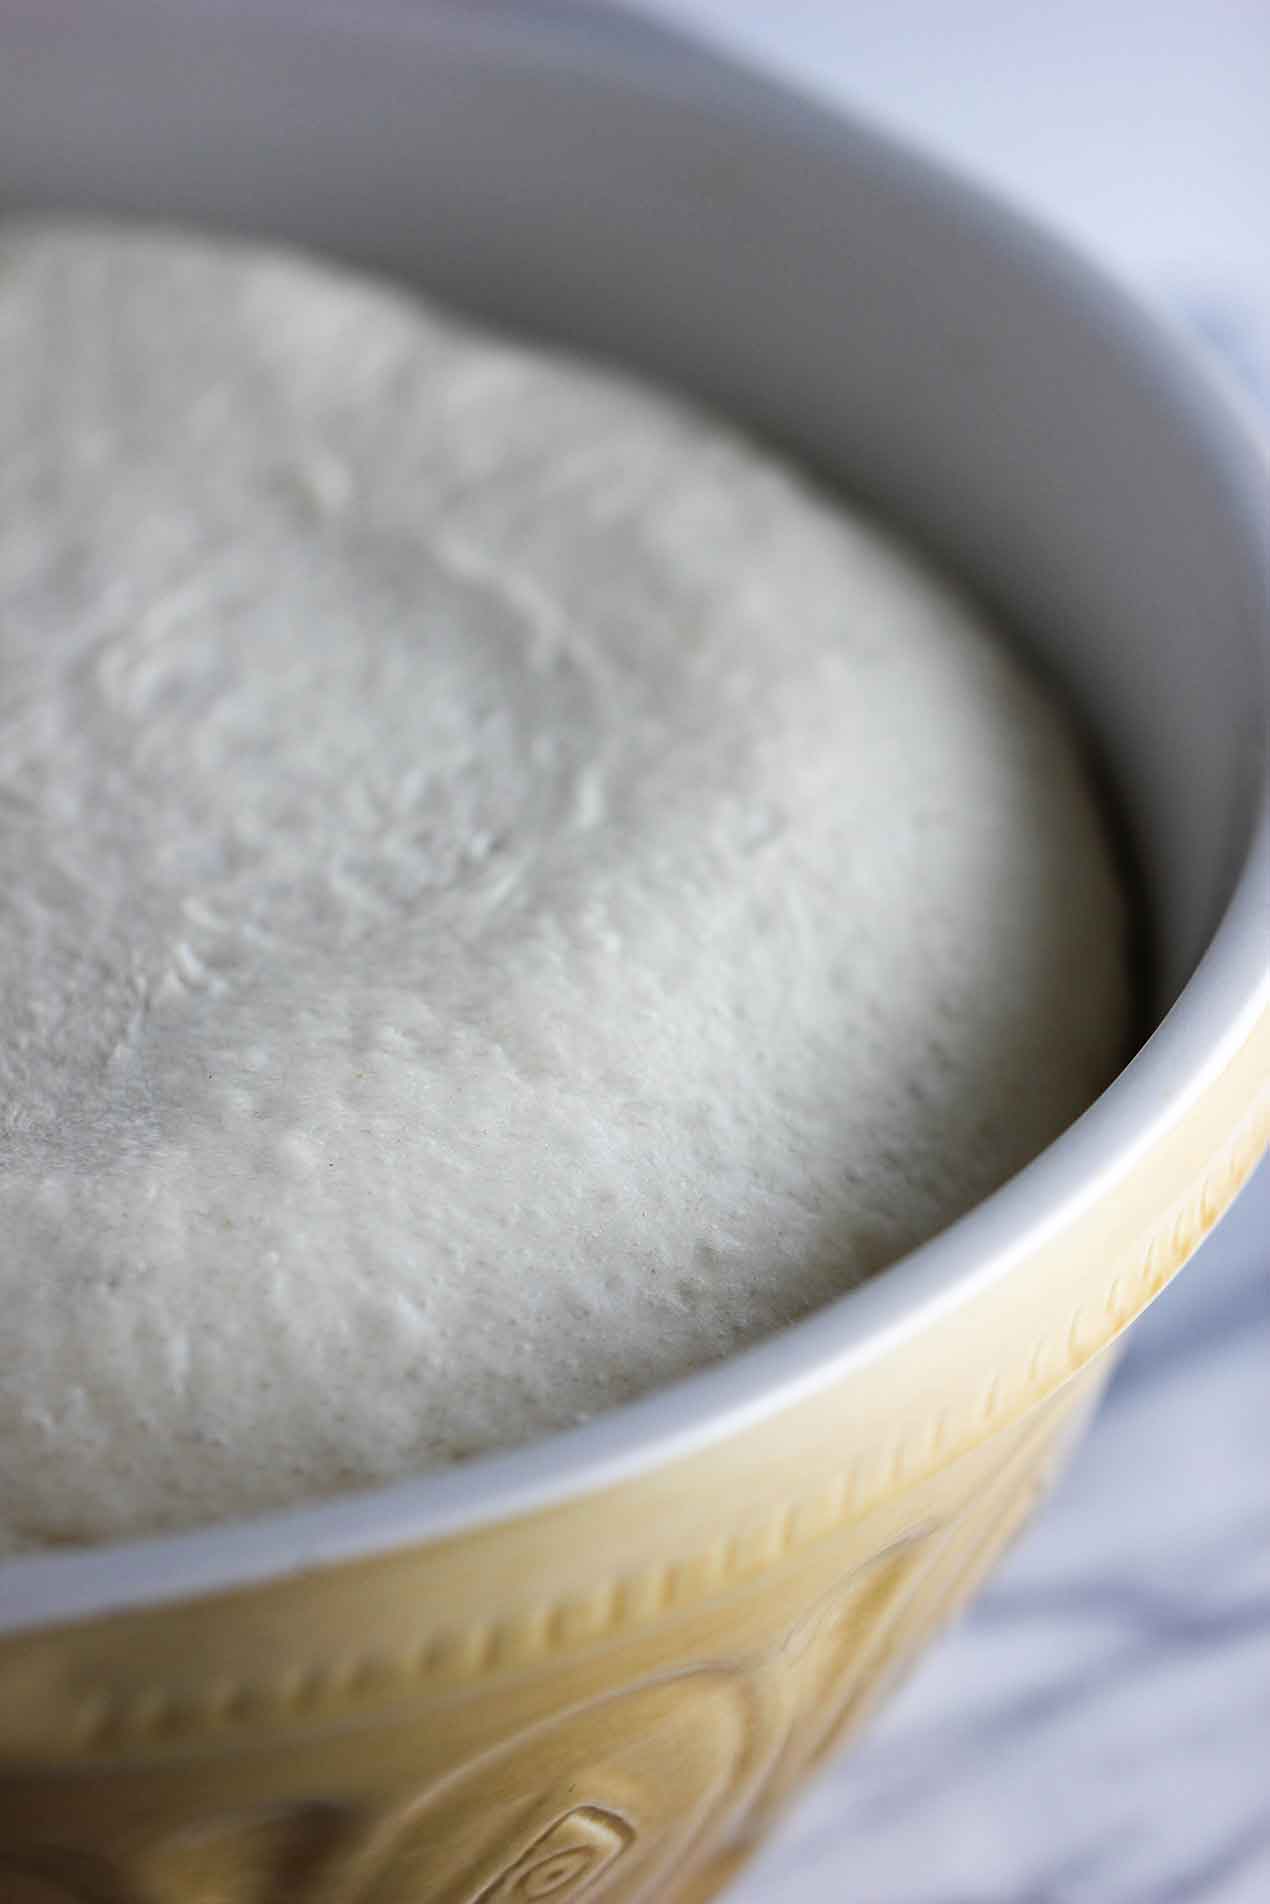 Dough proofing in a bowl for cheesy skillet rolls